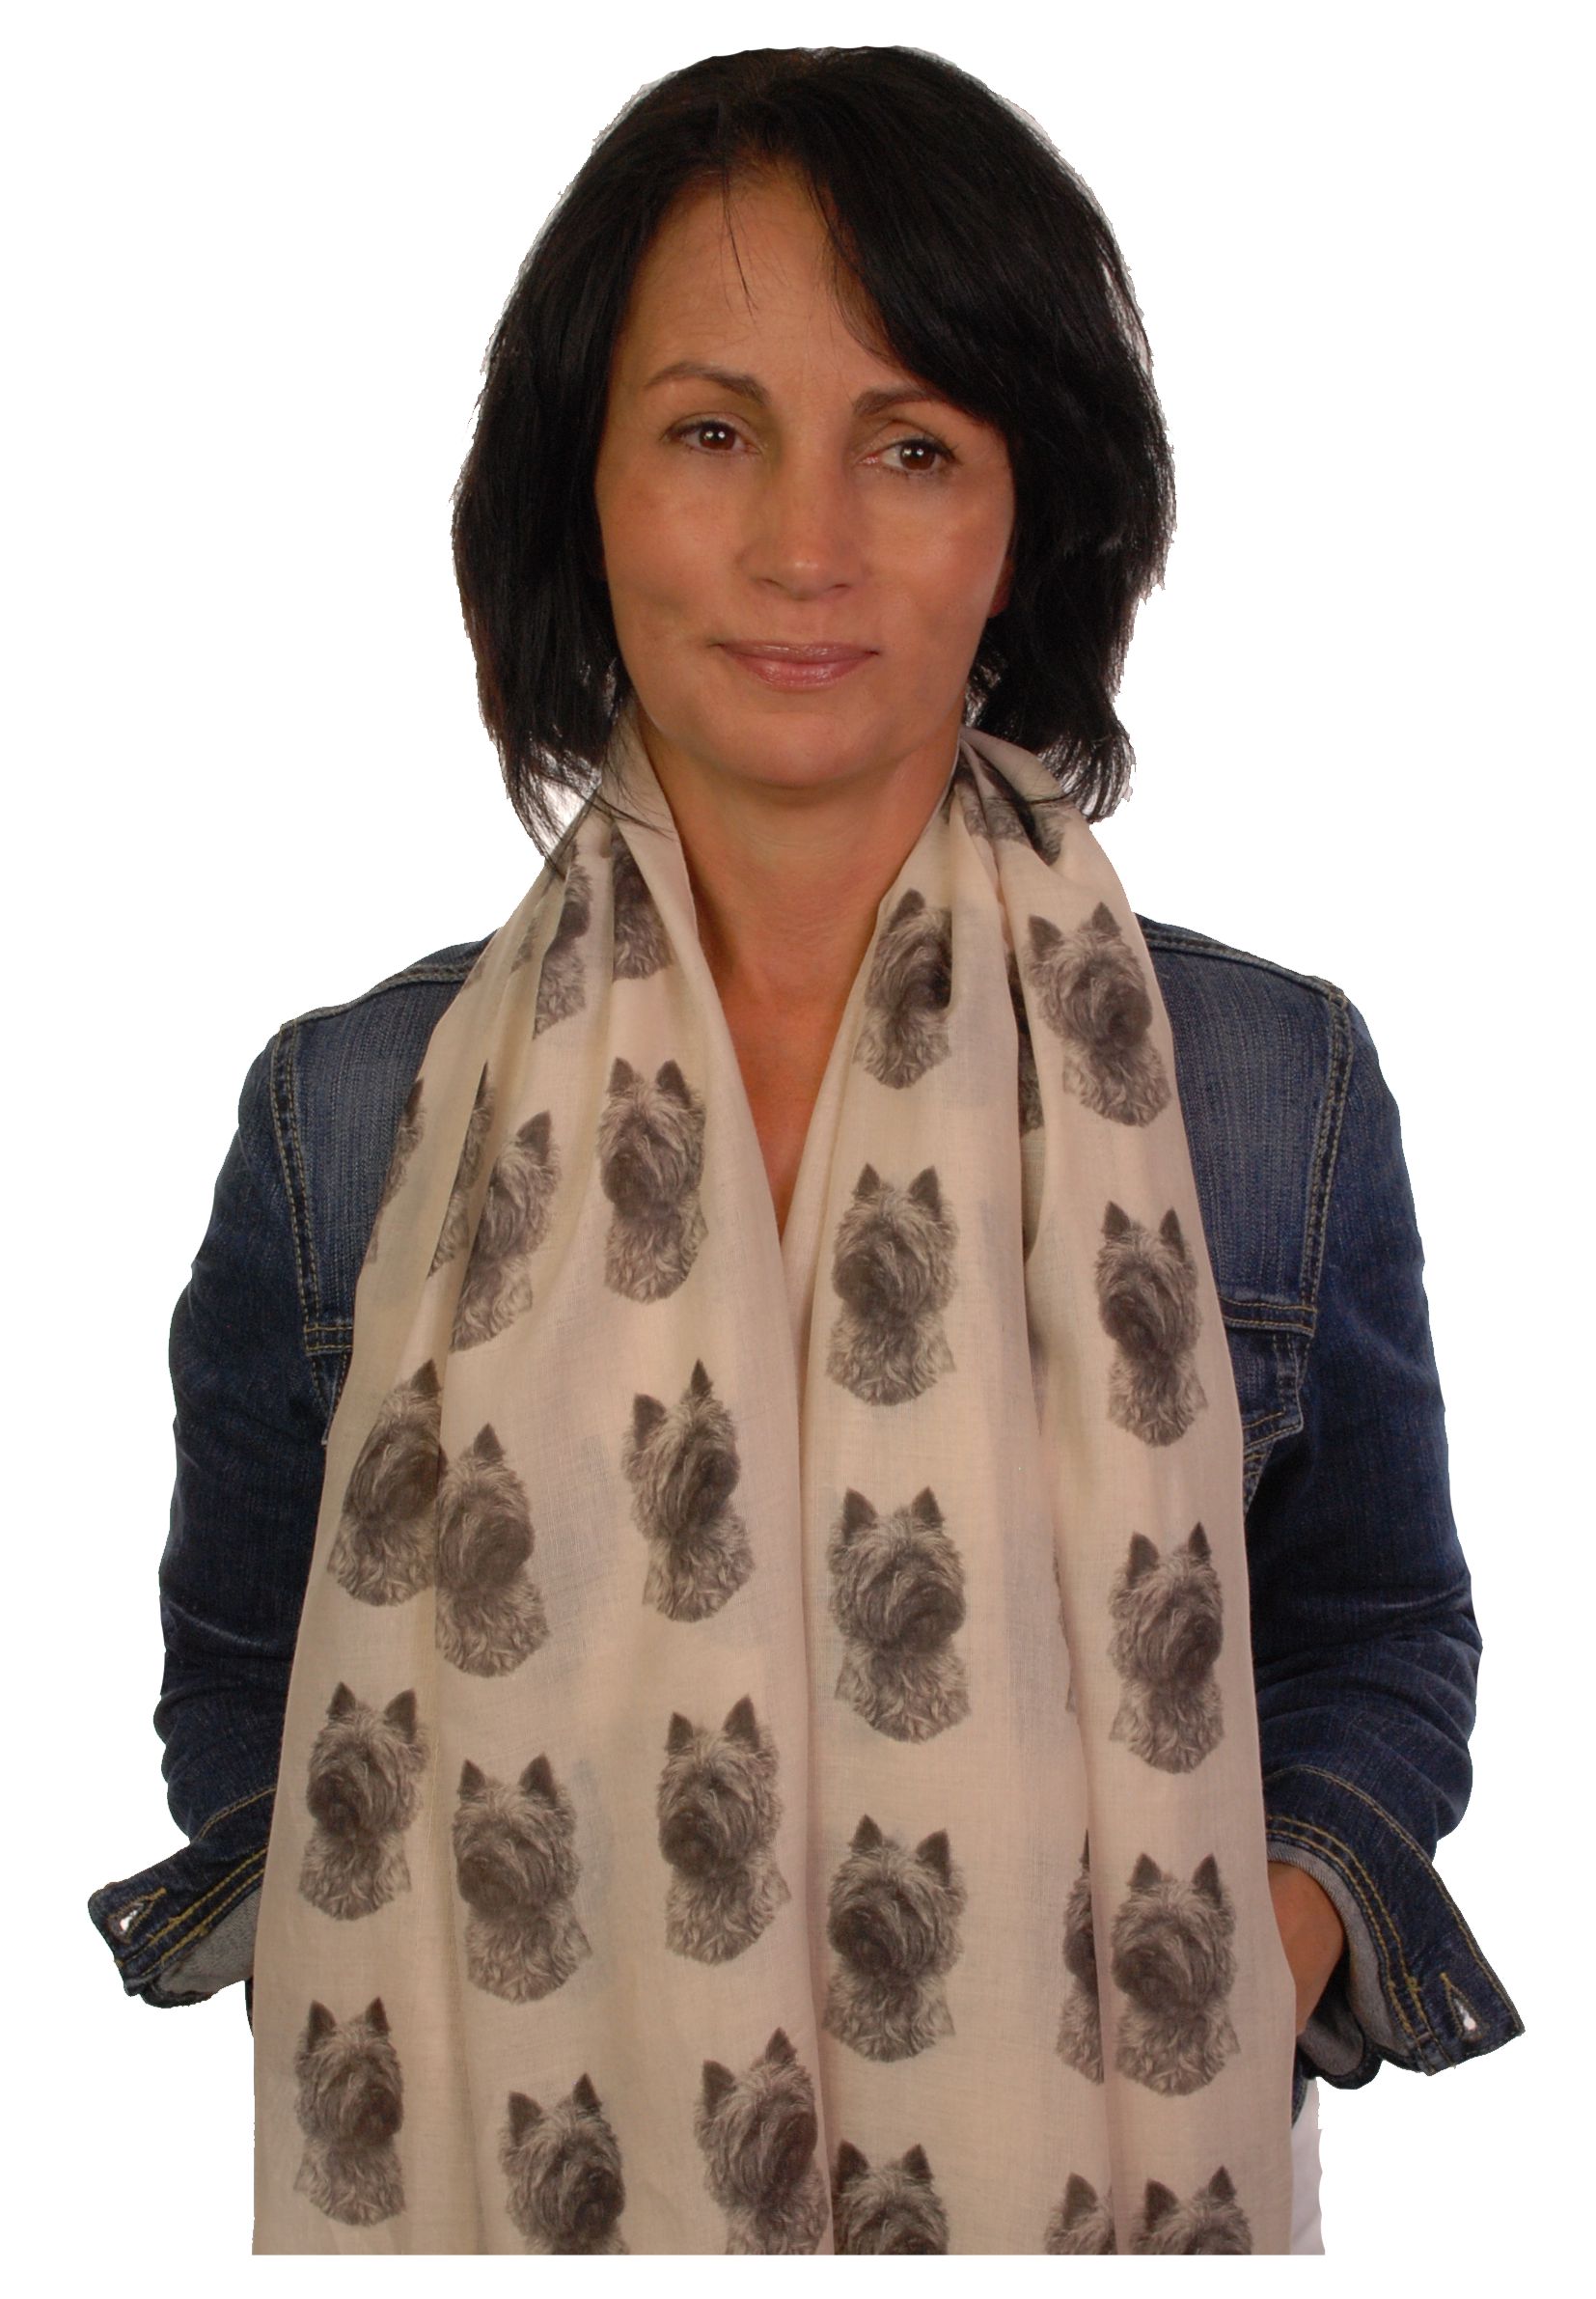 Mike Sibley Cairn Terrier licensed design ladies fashion scarf